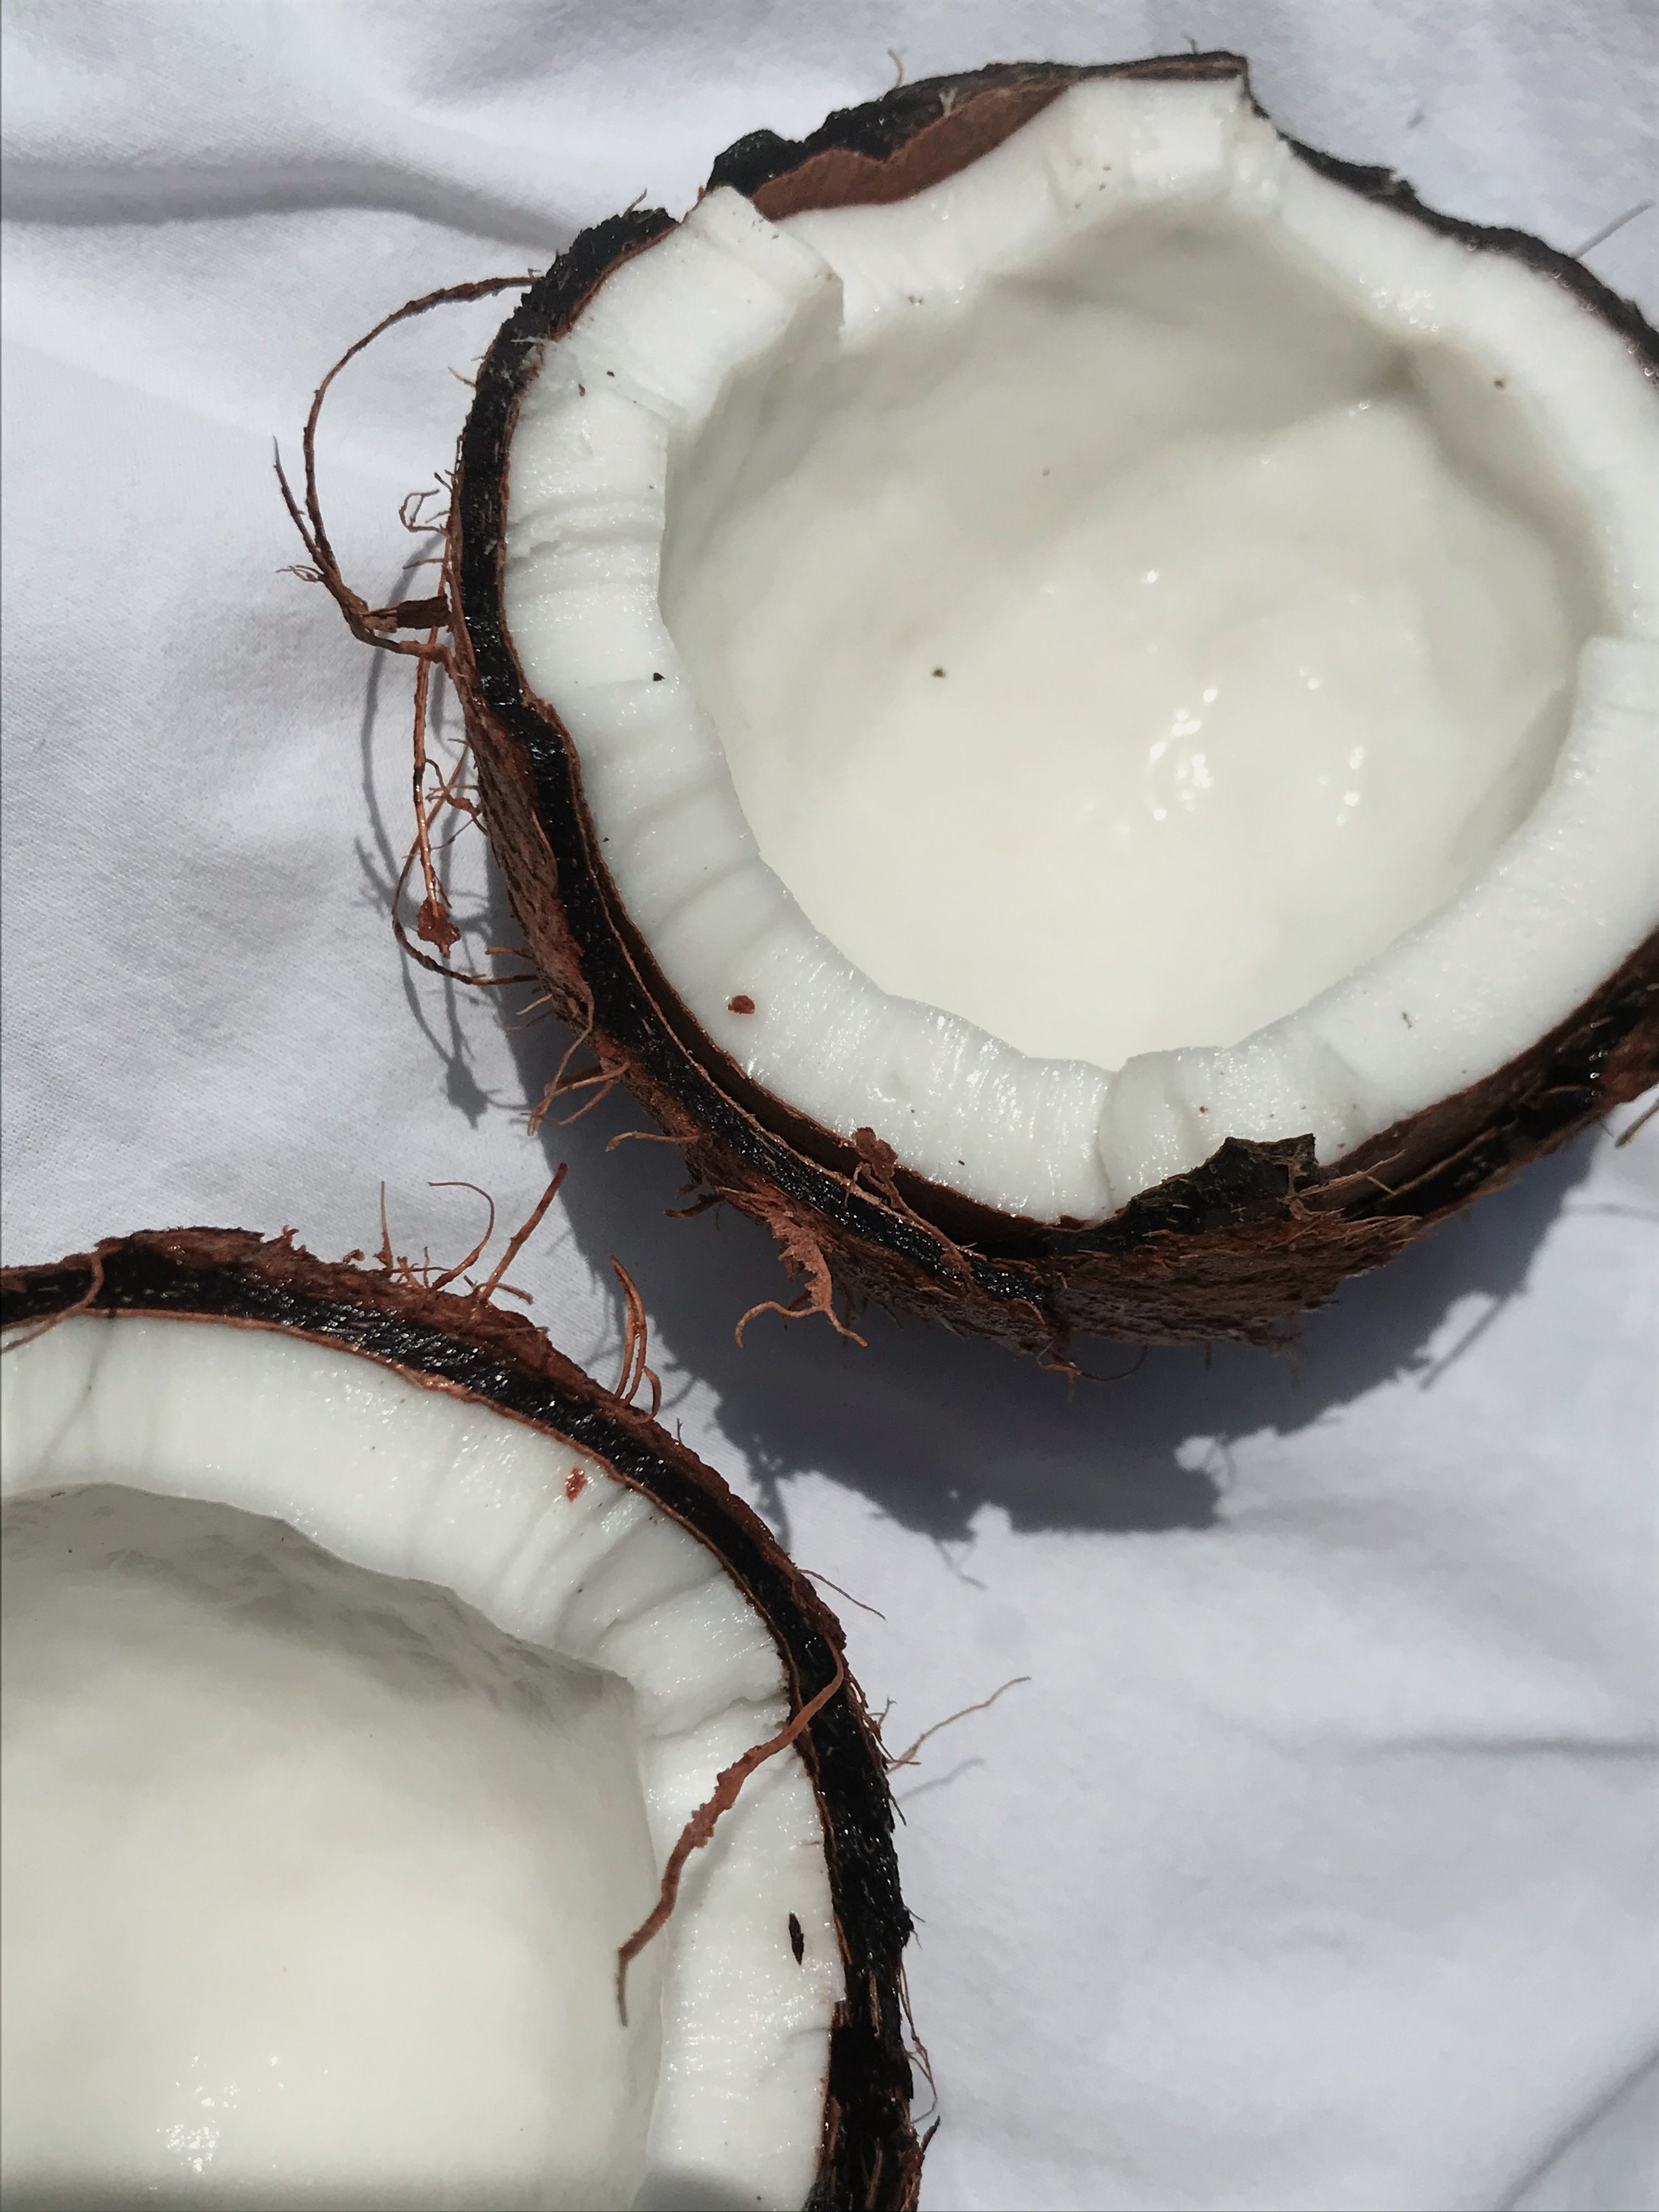 A coconut with the top cut off - Coconut